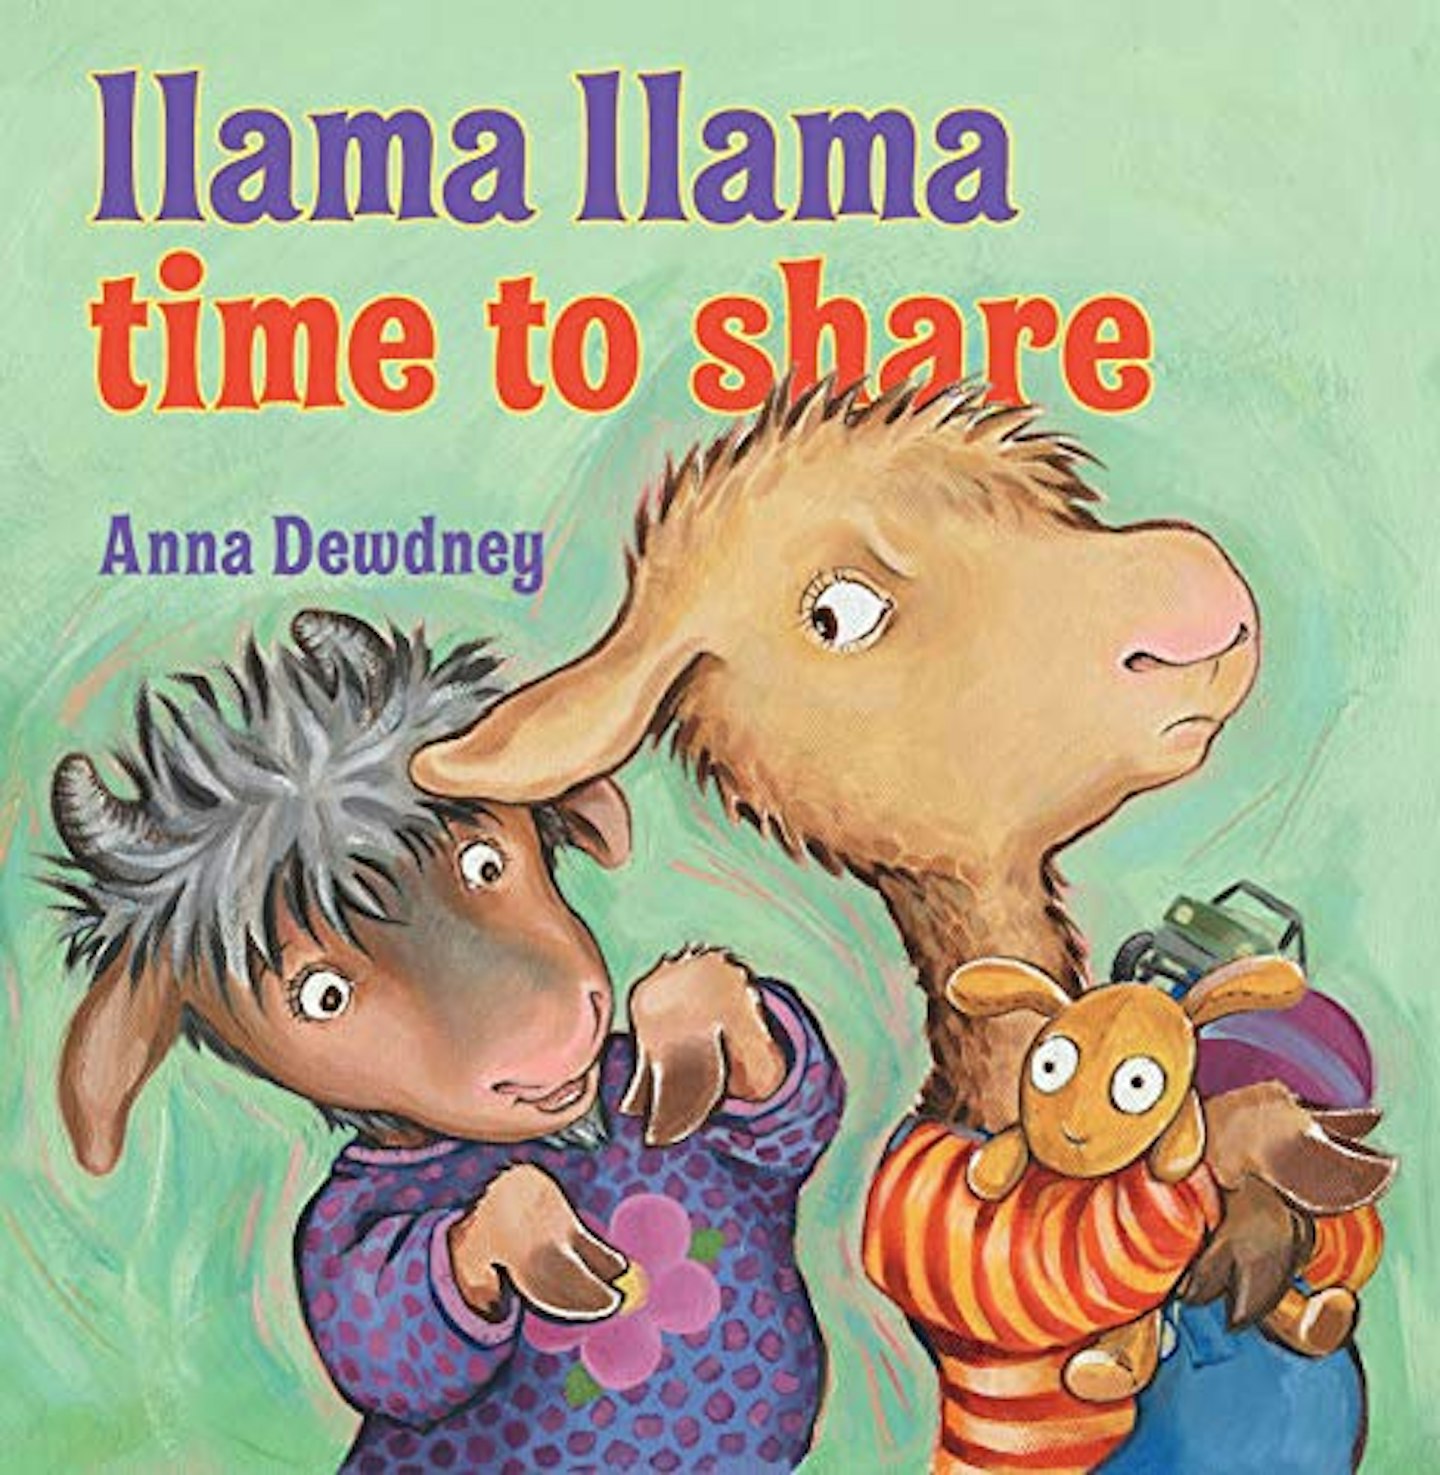 best-books-for-teaching-to-share-llama